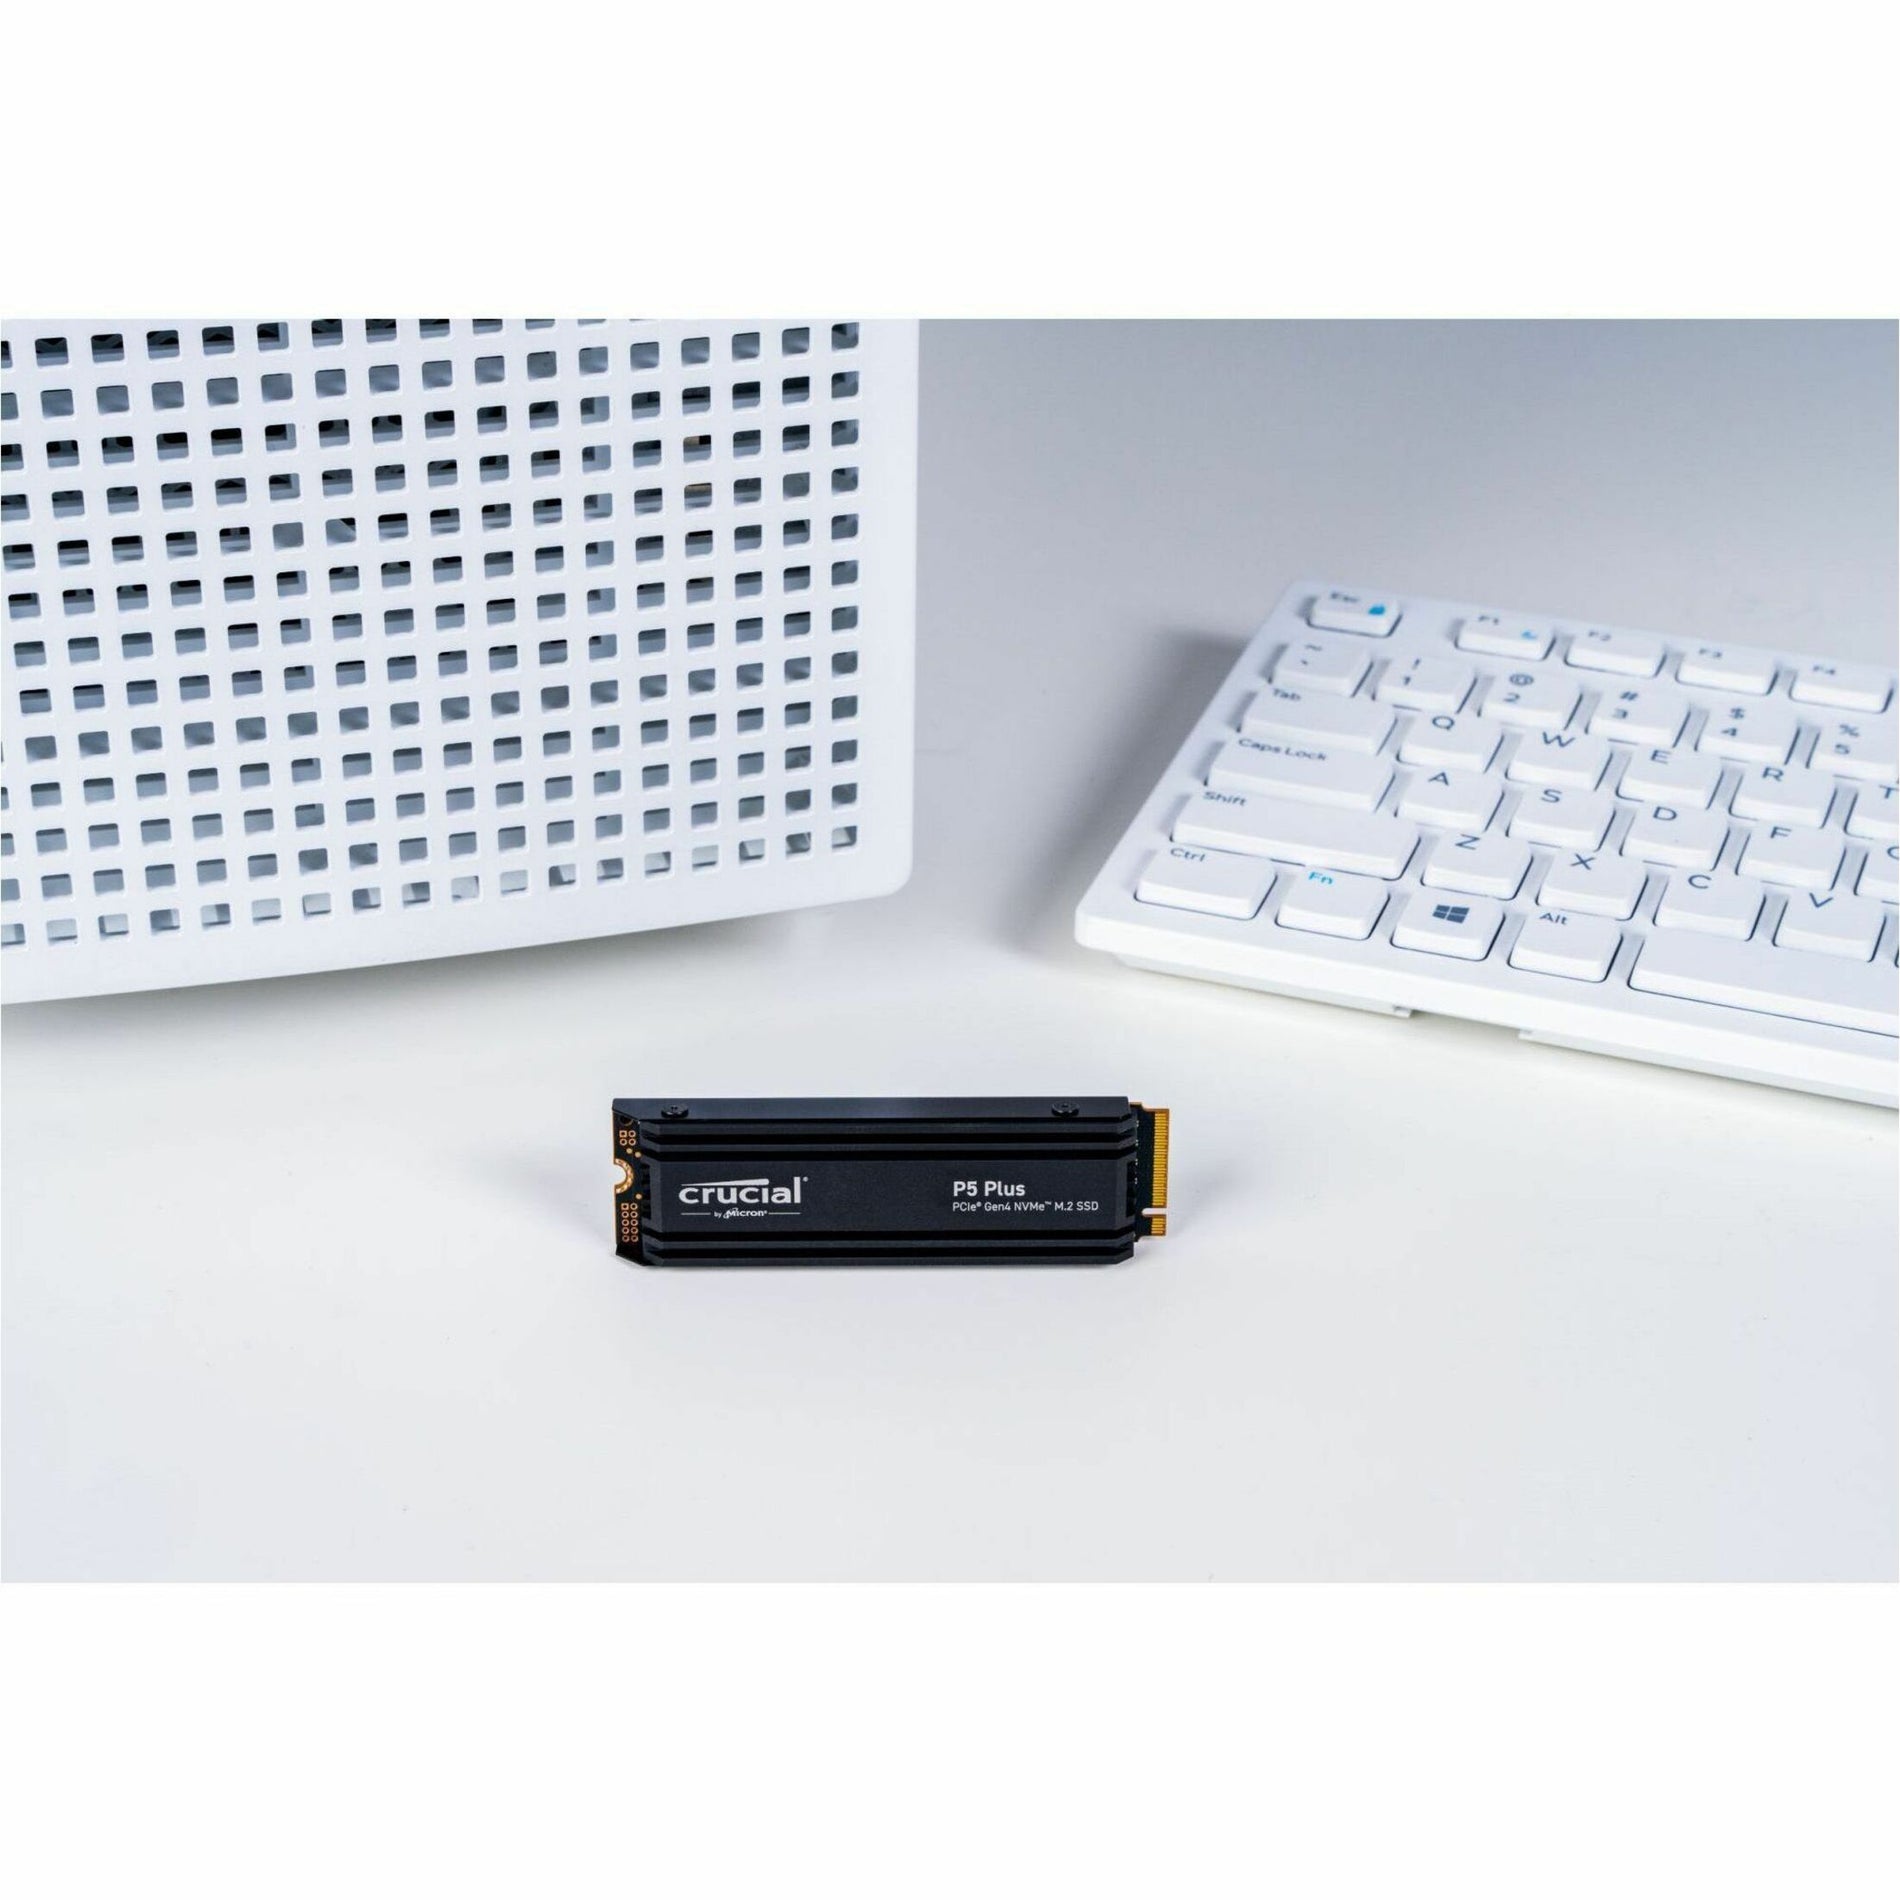 Crucial CT1000P5PSSD5 P5 Plus 1TB Gen4 NVMe M.2 SSD With Heatsink, High-Speed Storage Solution for PlayStation 5